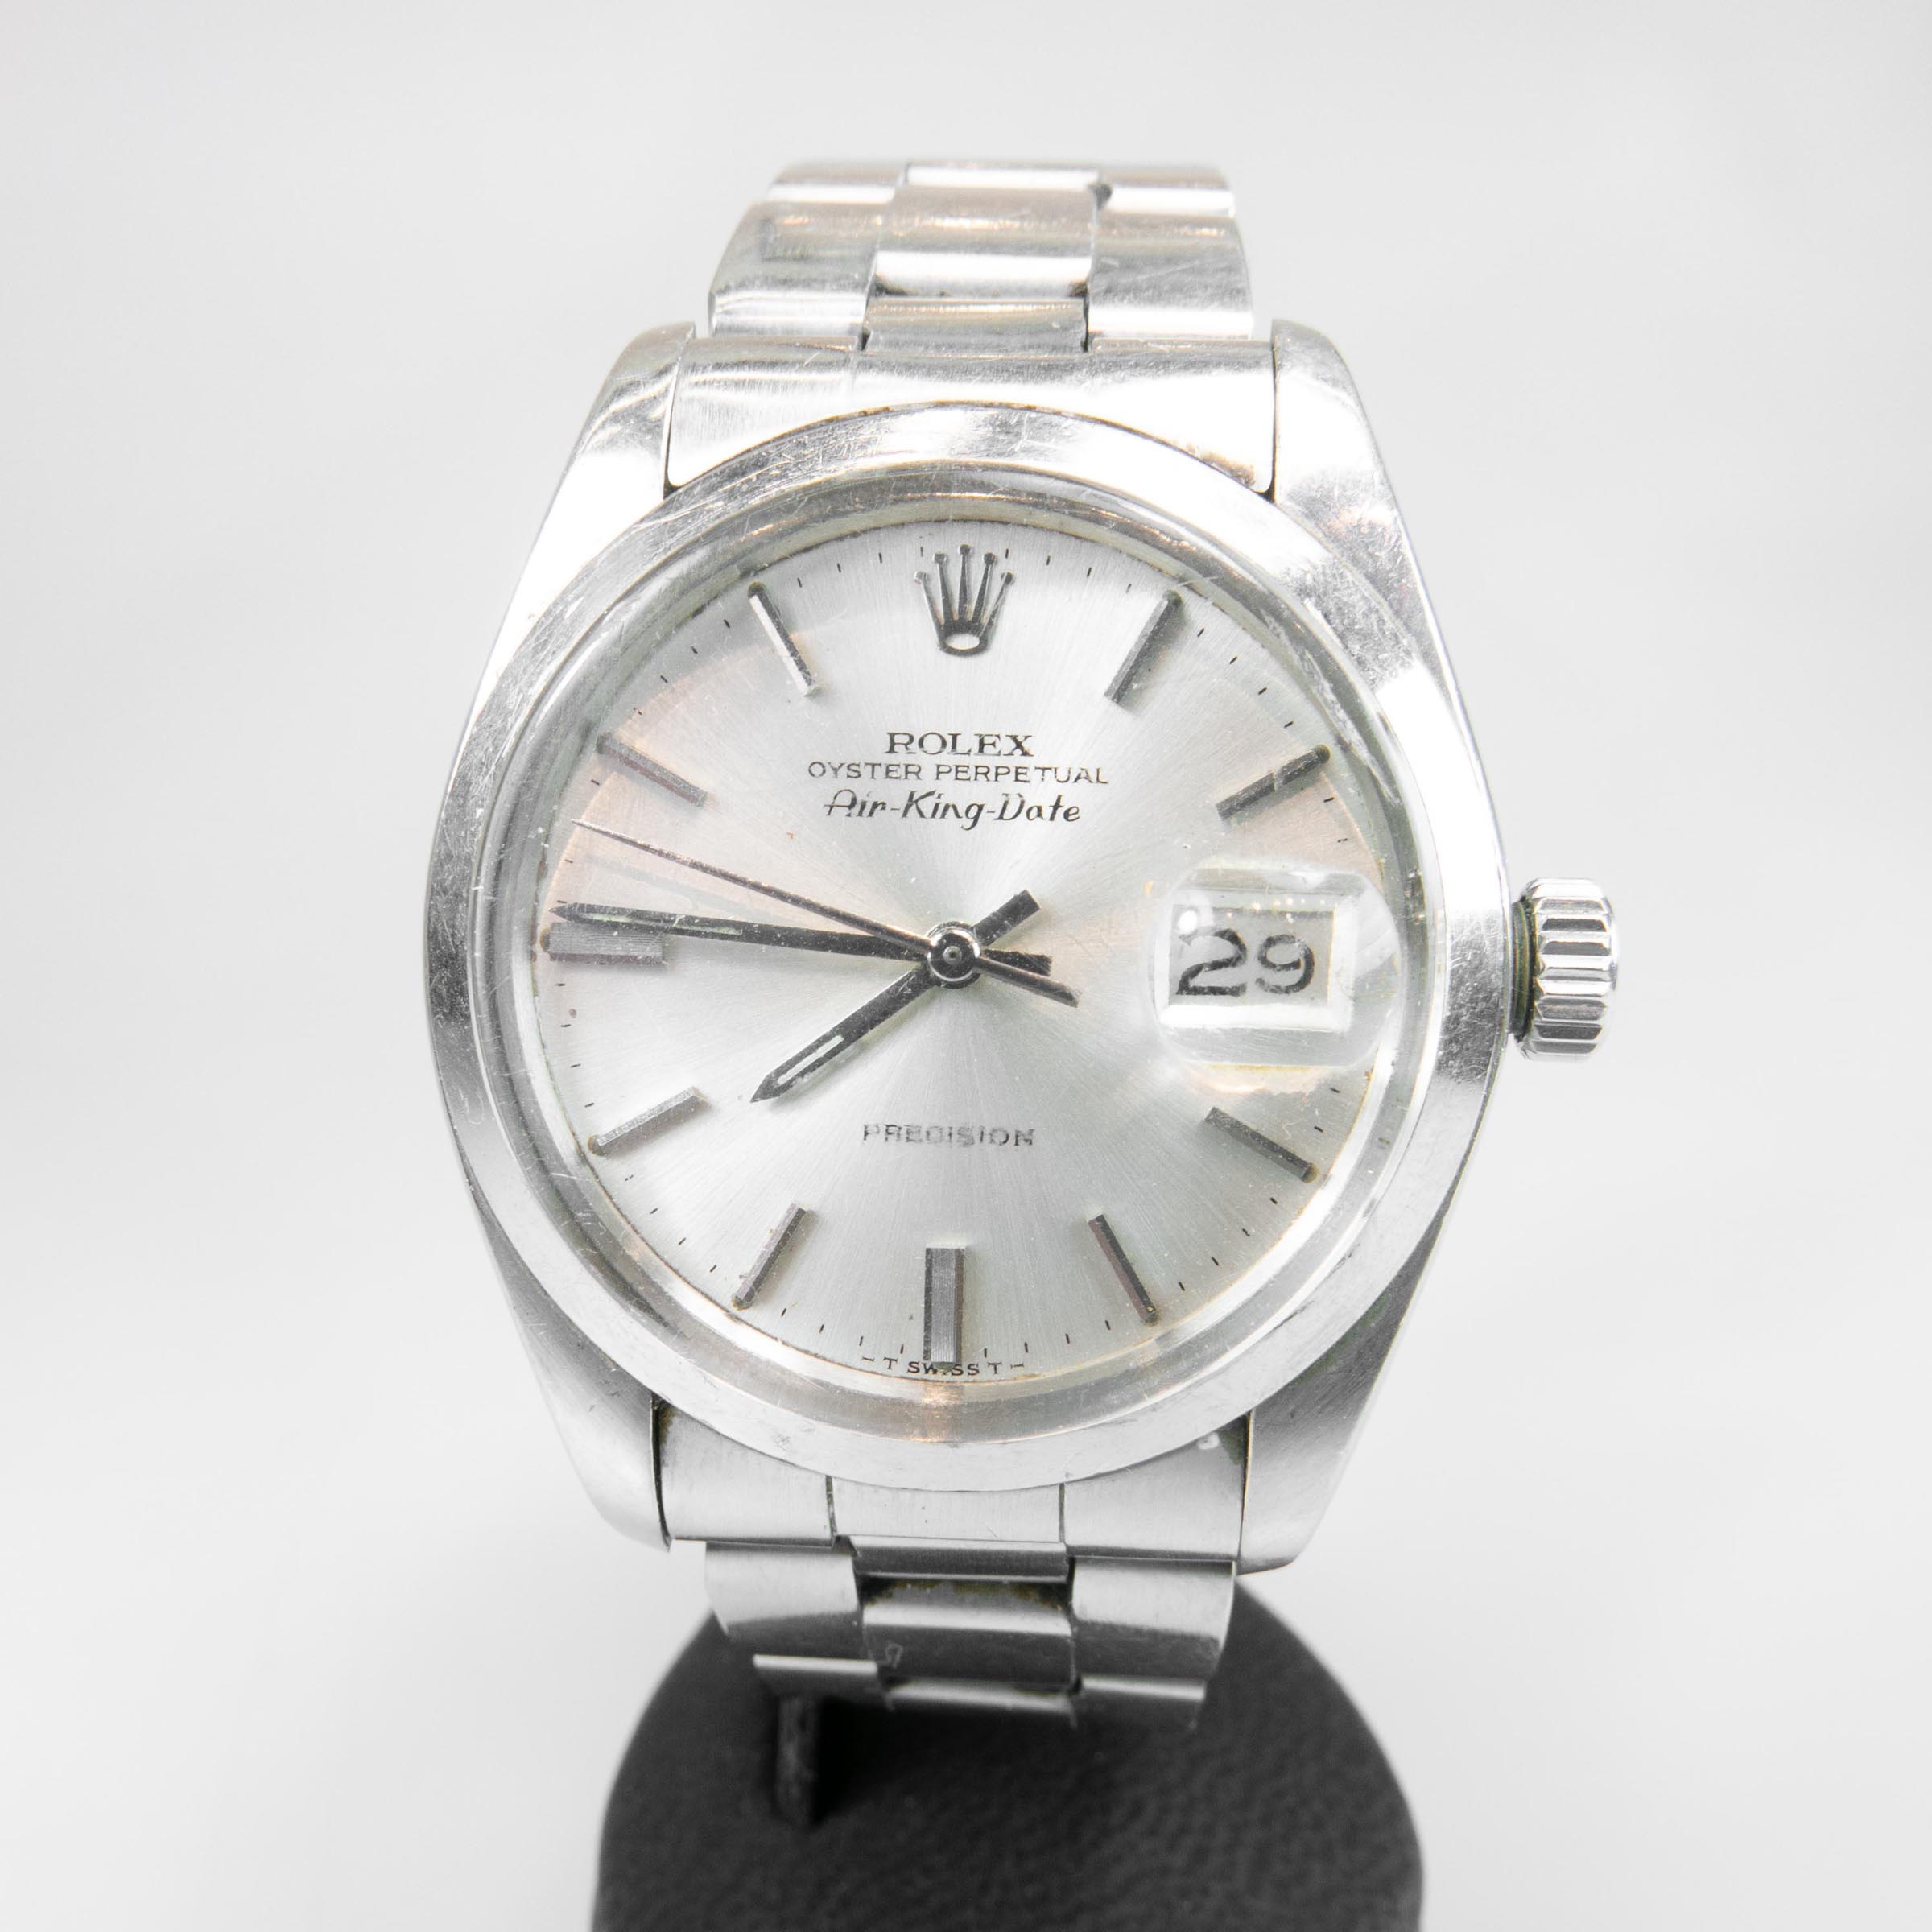 Rolex Oyster Perpetual Air King Date Wristwatch